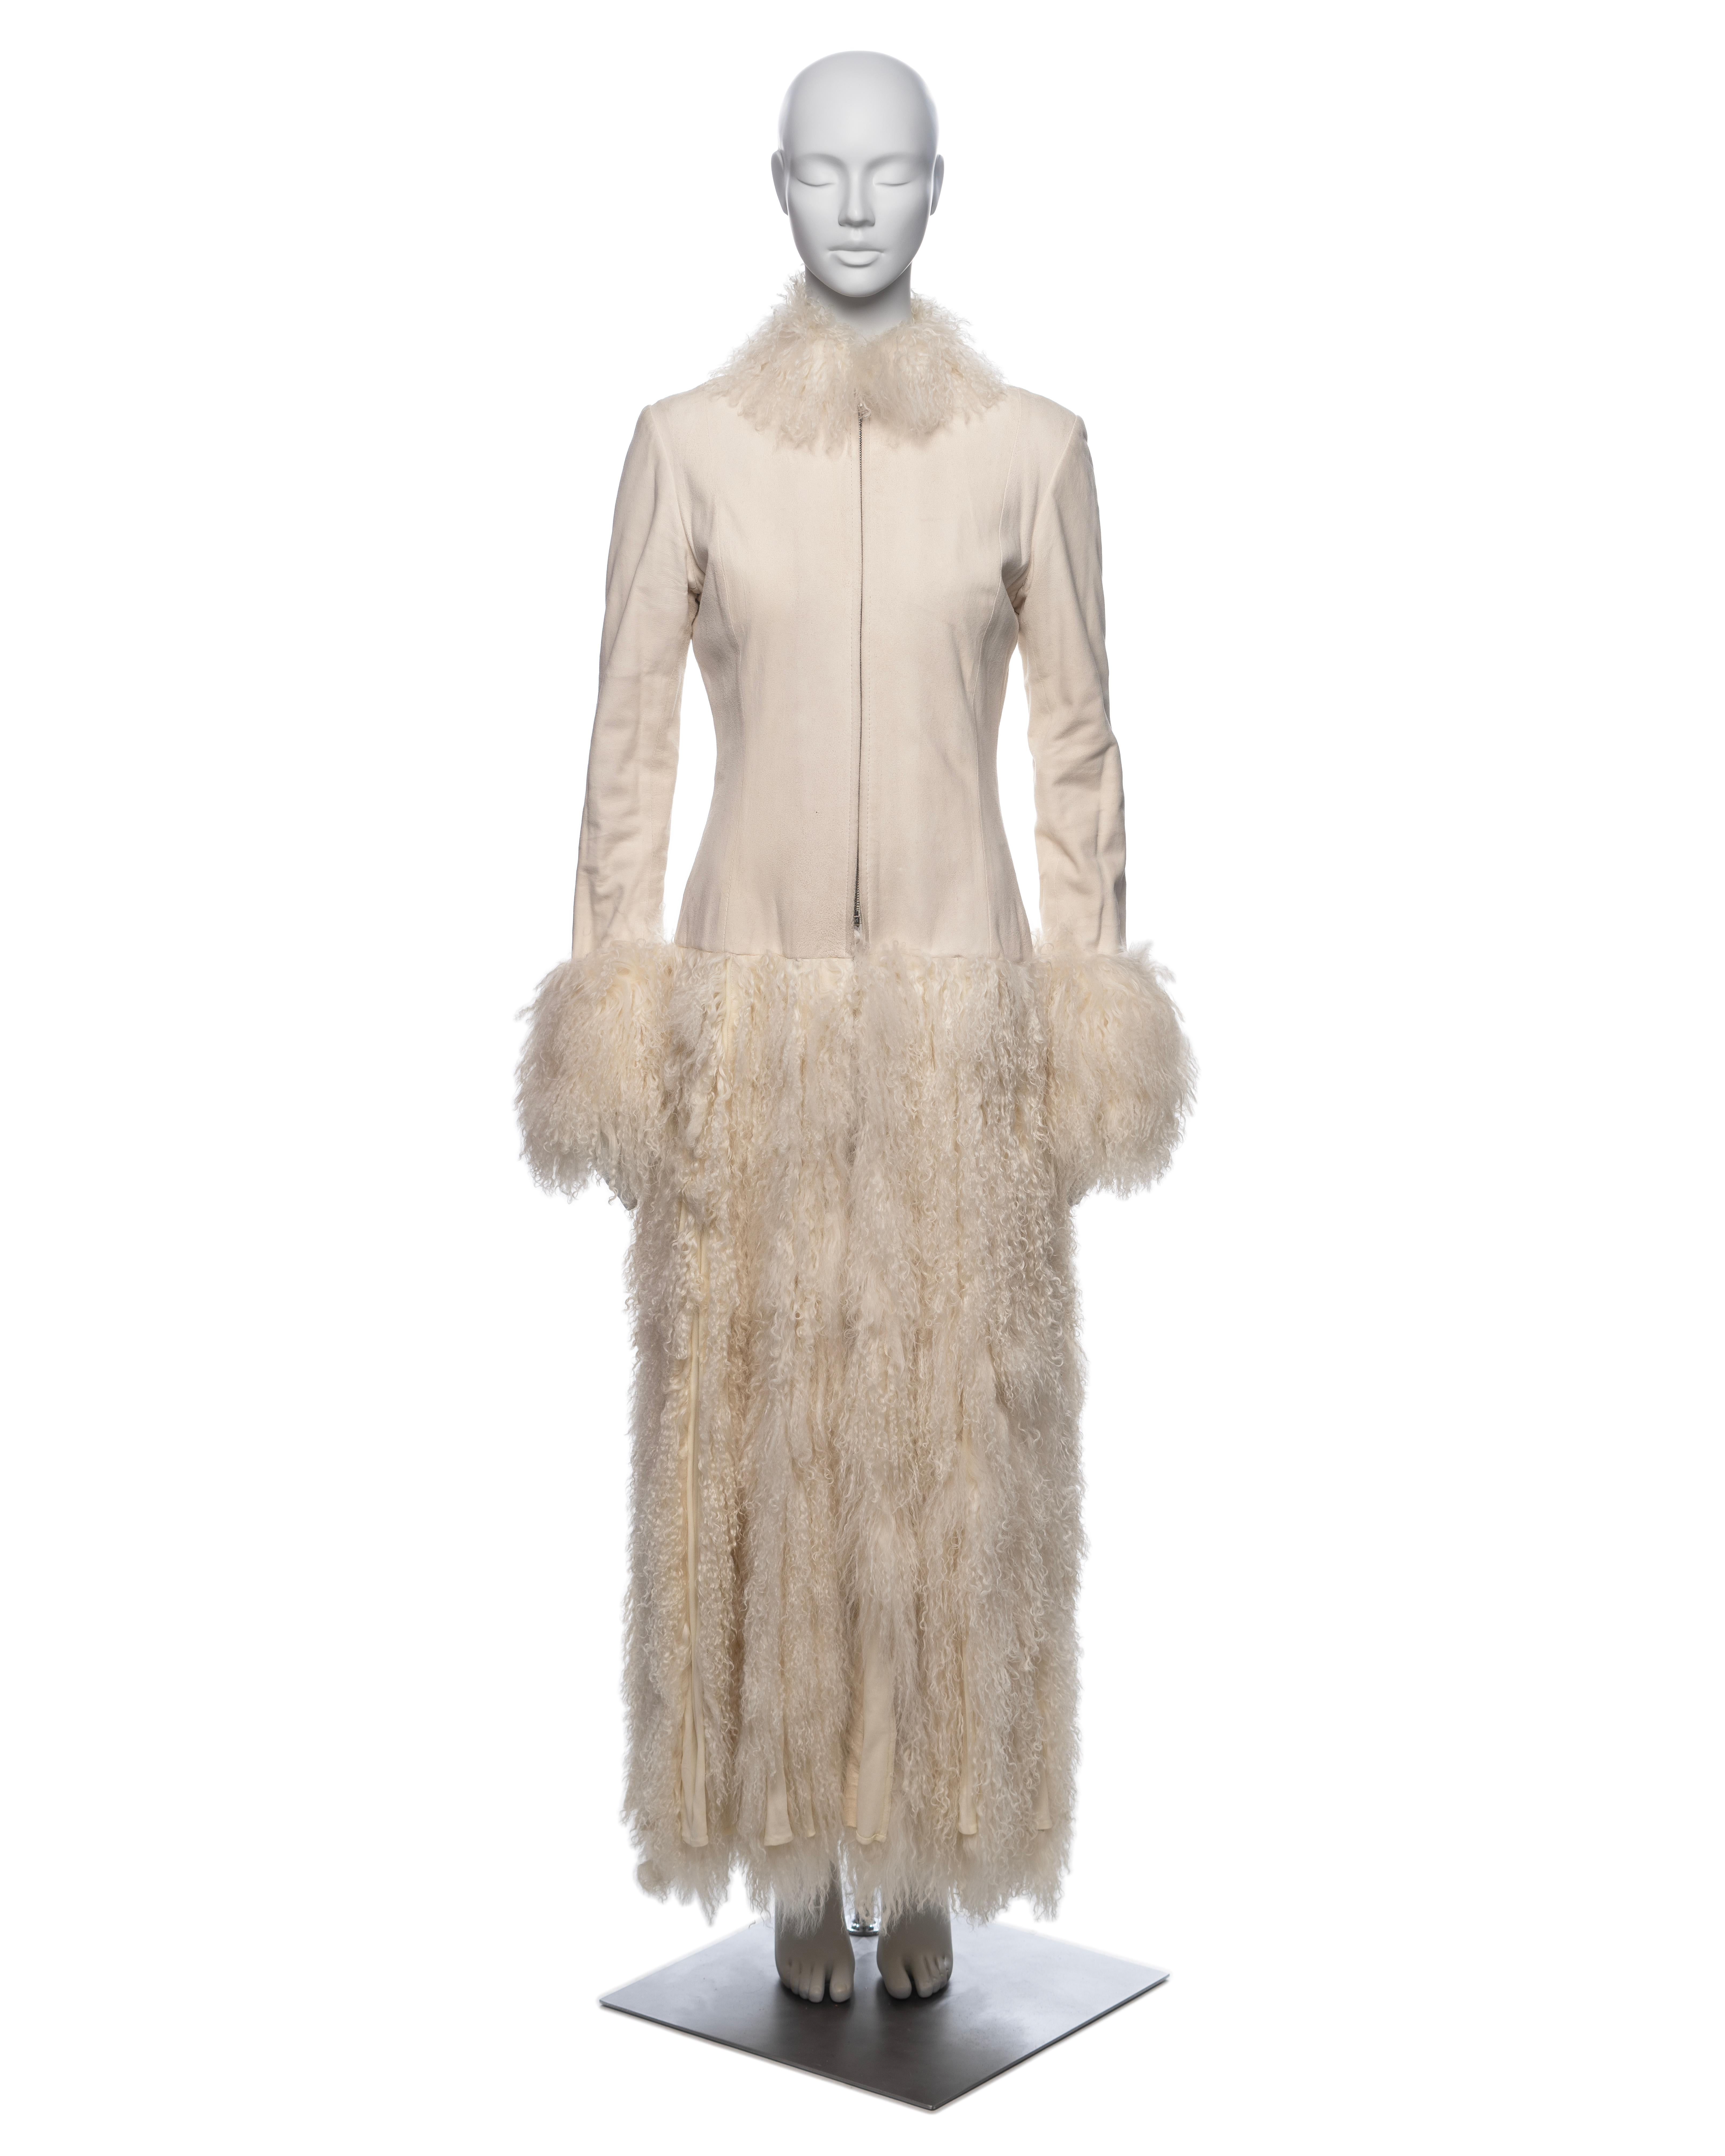 ▪ Brand: Jean Paul Gaultier
▪ Creative Director: Jean Paul Gaultier
▪ Collection: Fall-Winter 2006
▪ Sold by: One of a Kind Archive
▪ Fabric: Mongolian Lamb Fur, Antilope Leather
▪ Details: Features a fitted bodice with shearling lining and a zip-up